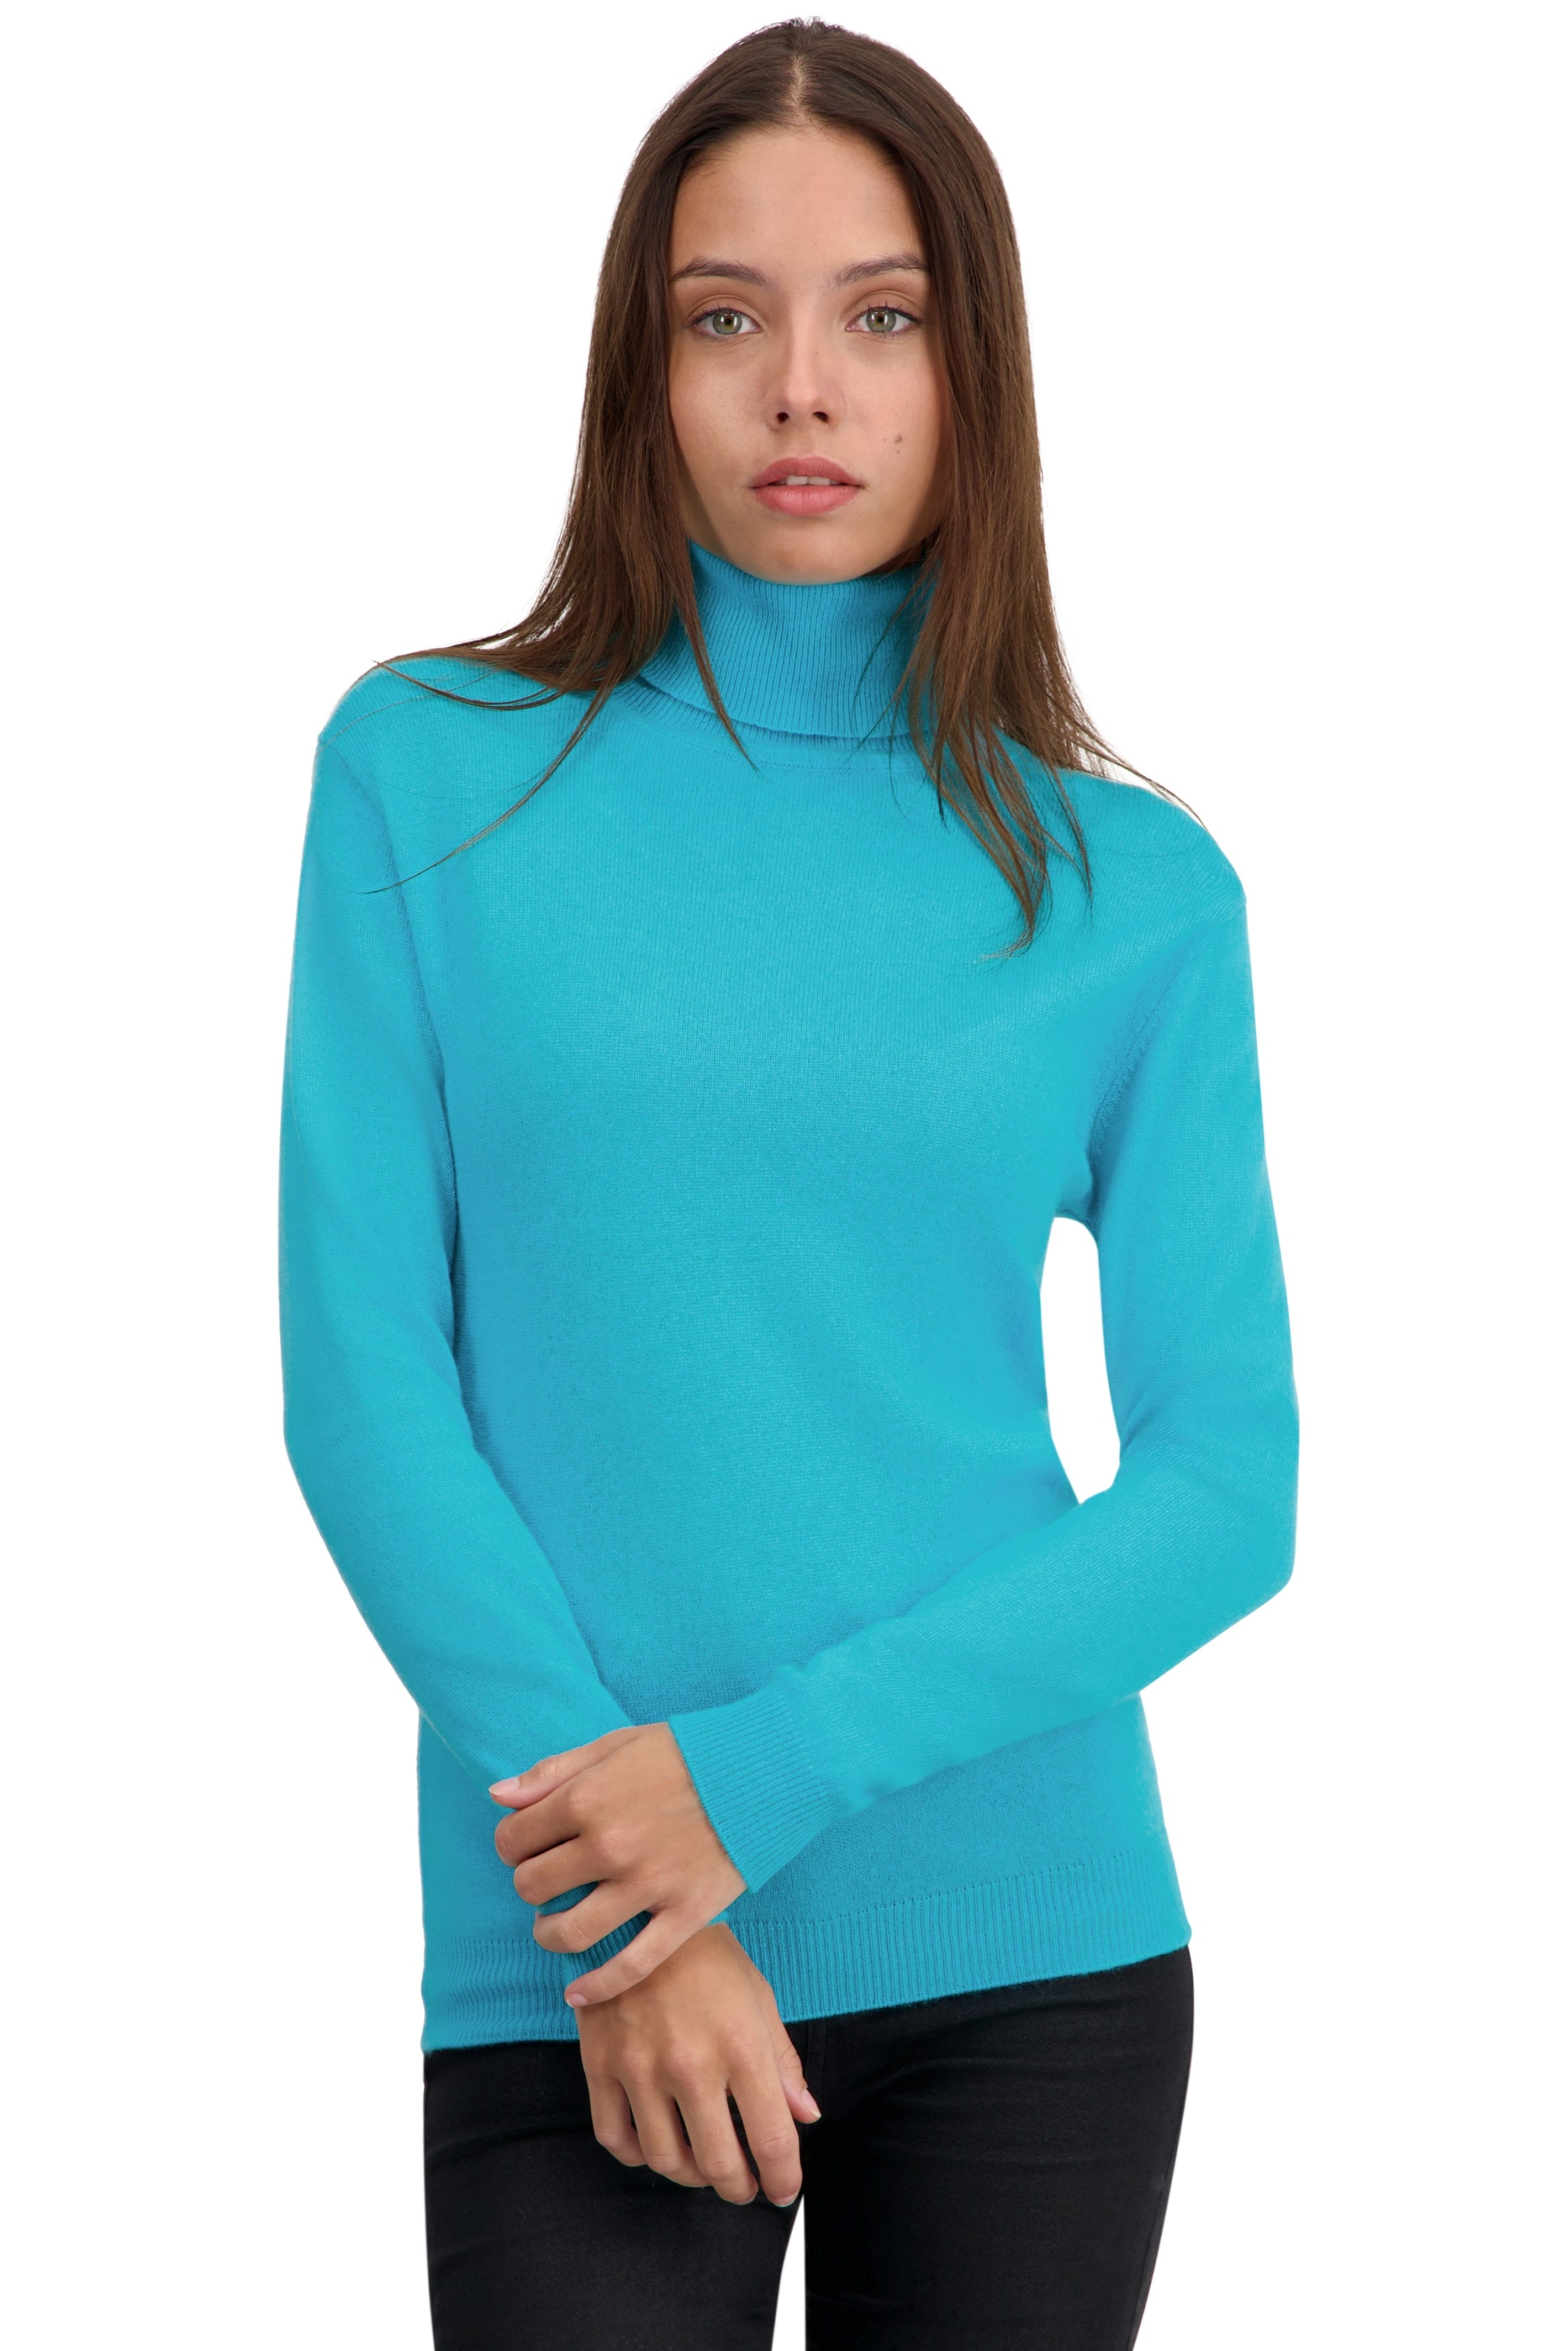 Cashmere ladies tale first kingfisher s